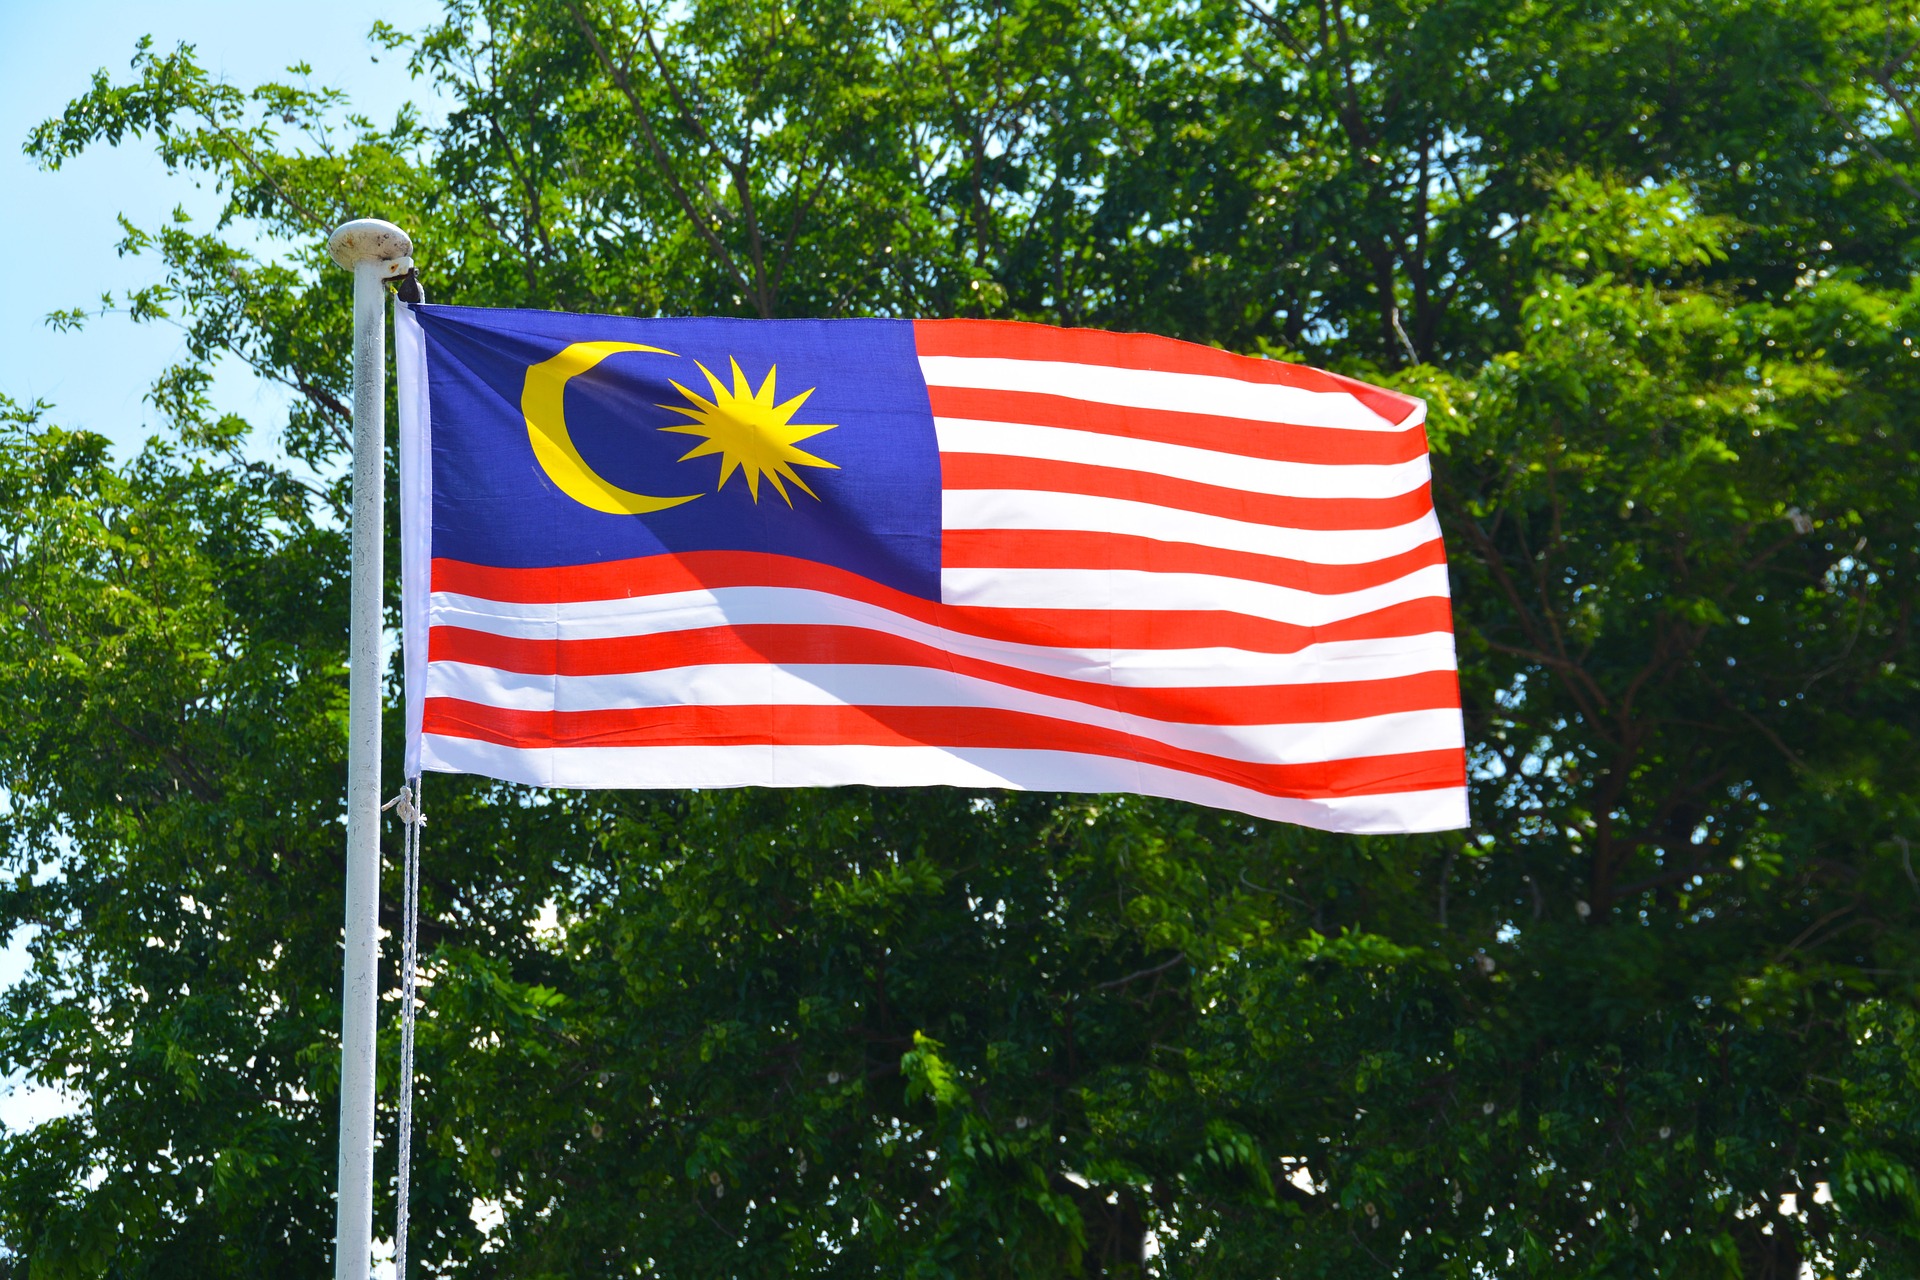 By 2050, Malaysian electric utility firm wants to be emissions-free